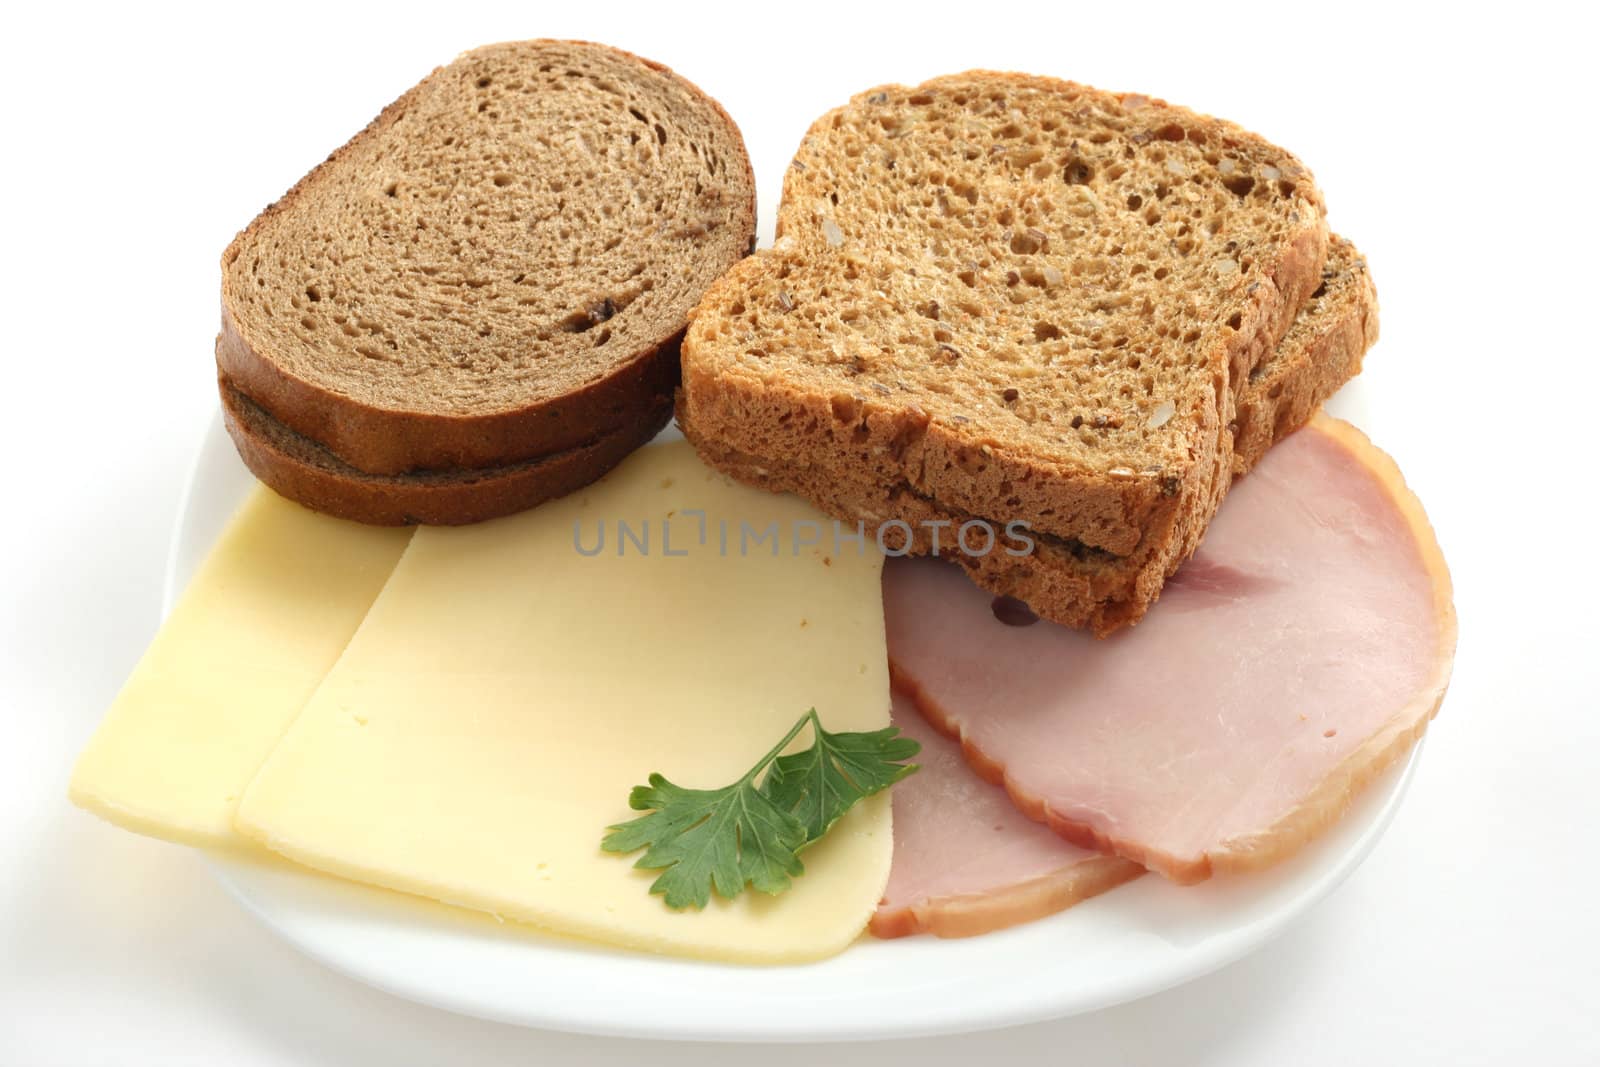 cheese, ham and bread